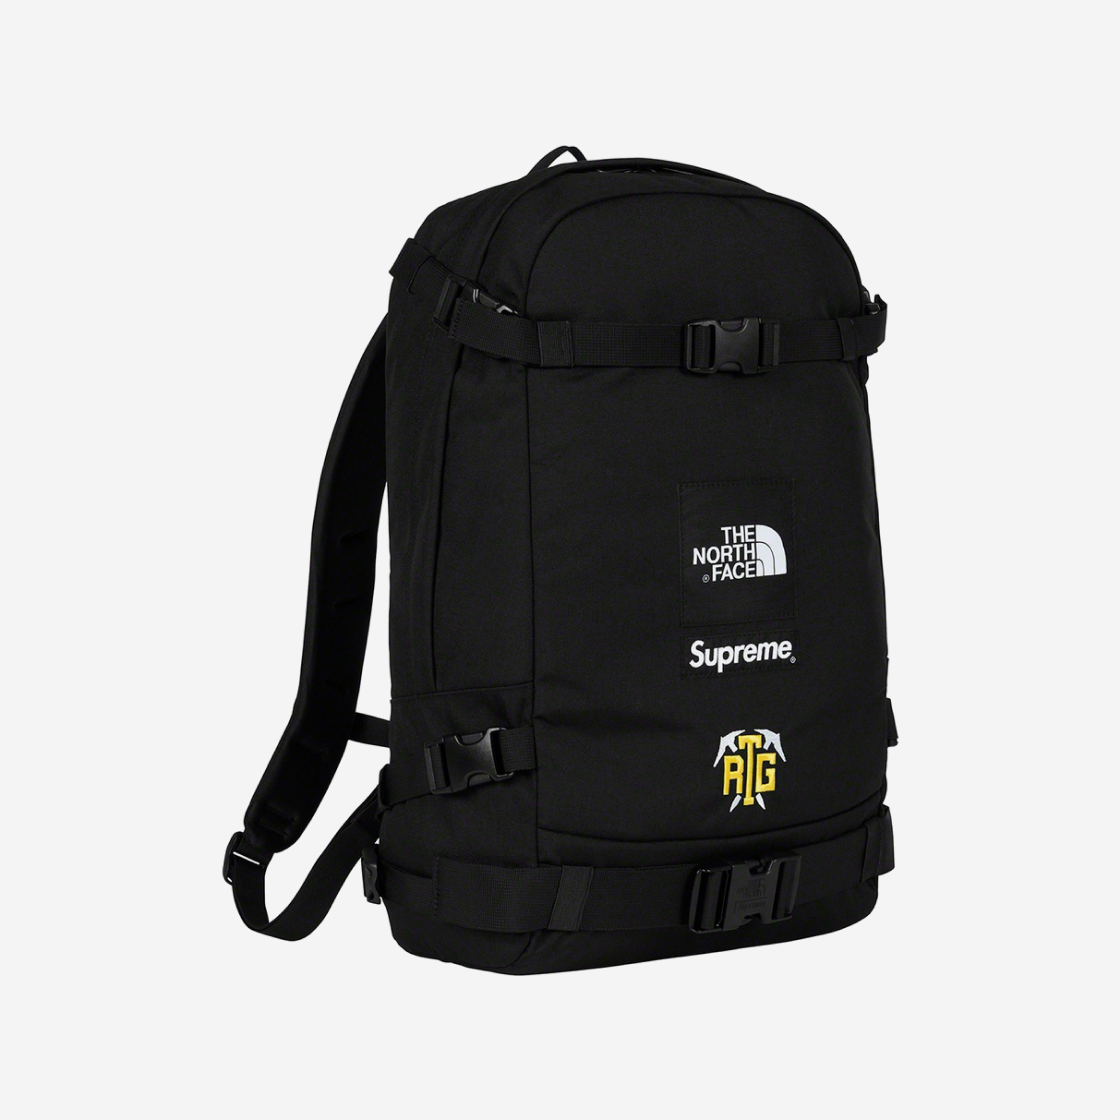 Supreme x The North Face RTG Backpack Black 20SS NF0A3VYAJK3 | eBay